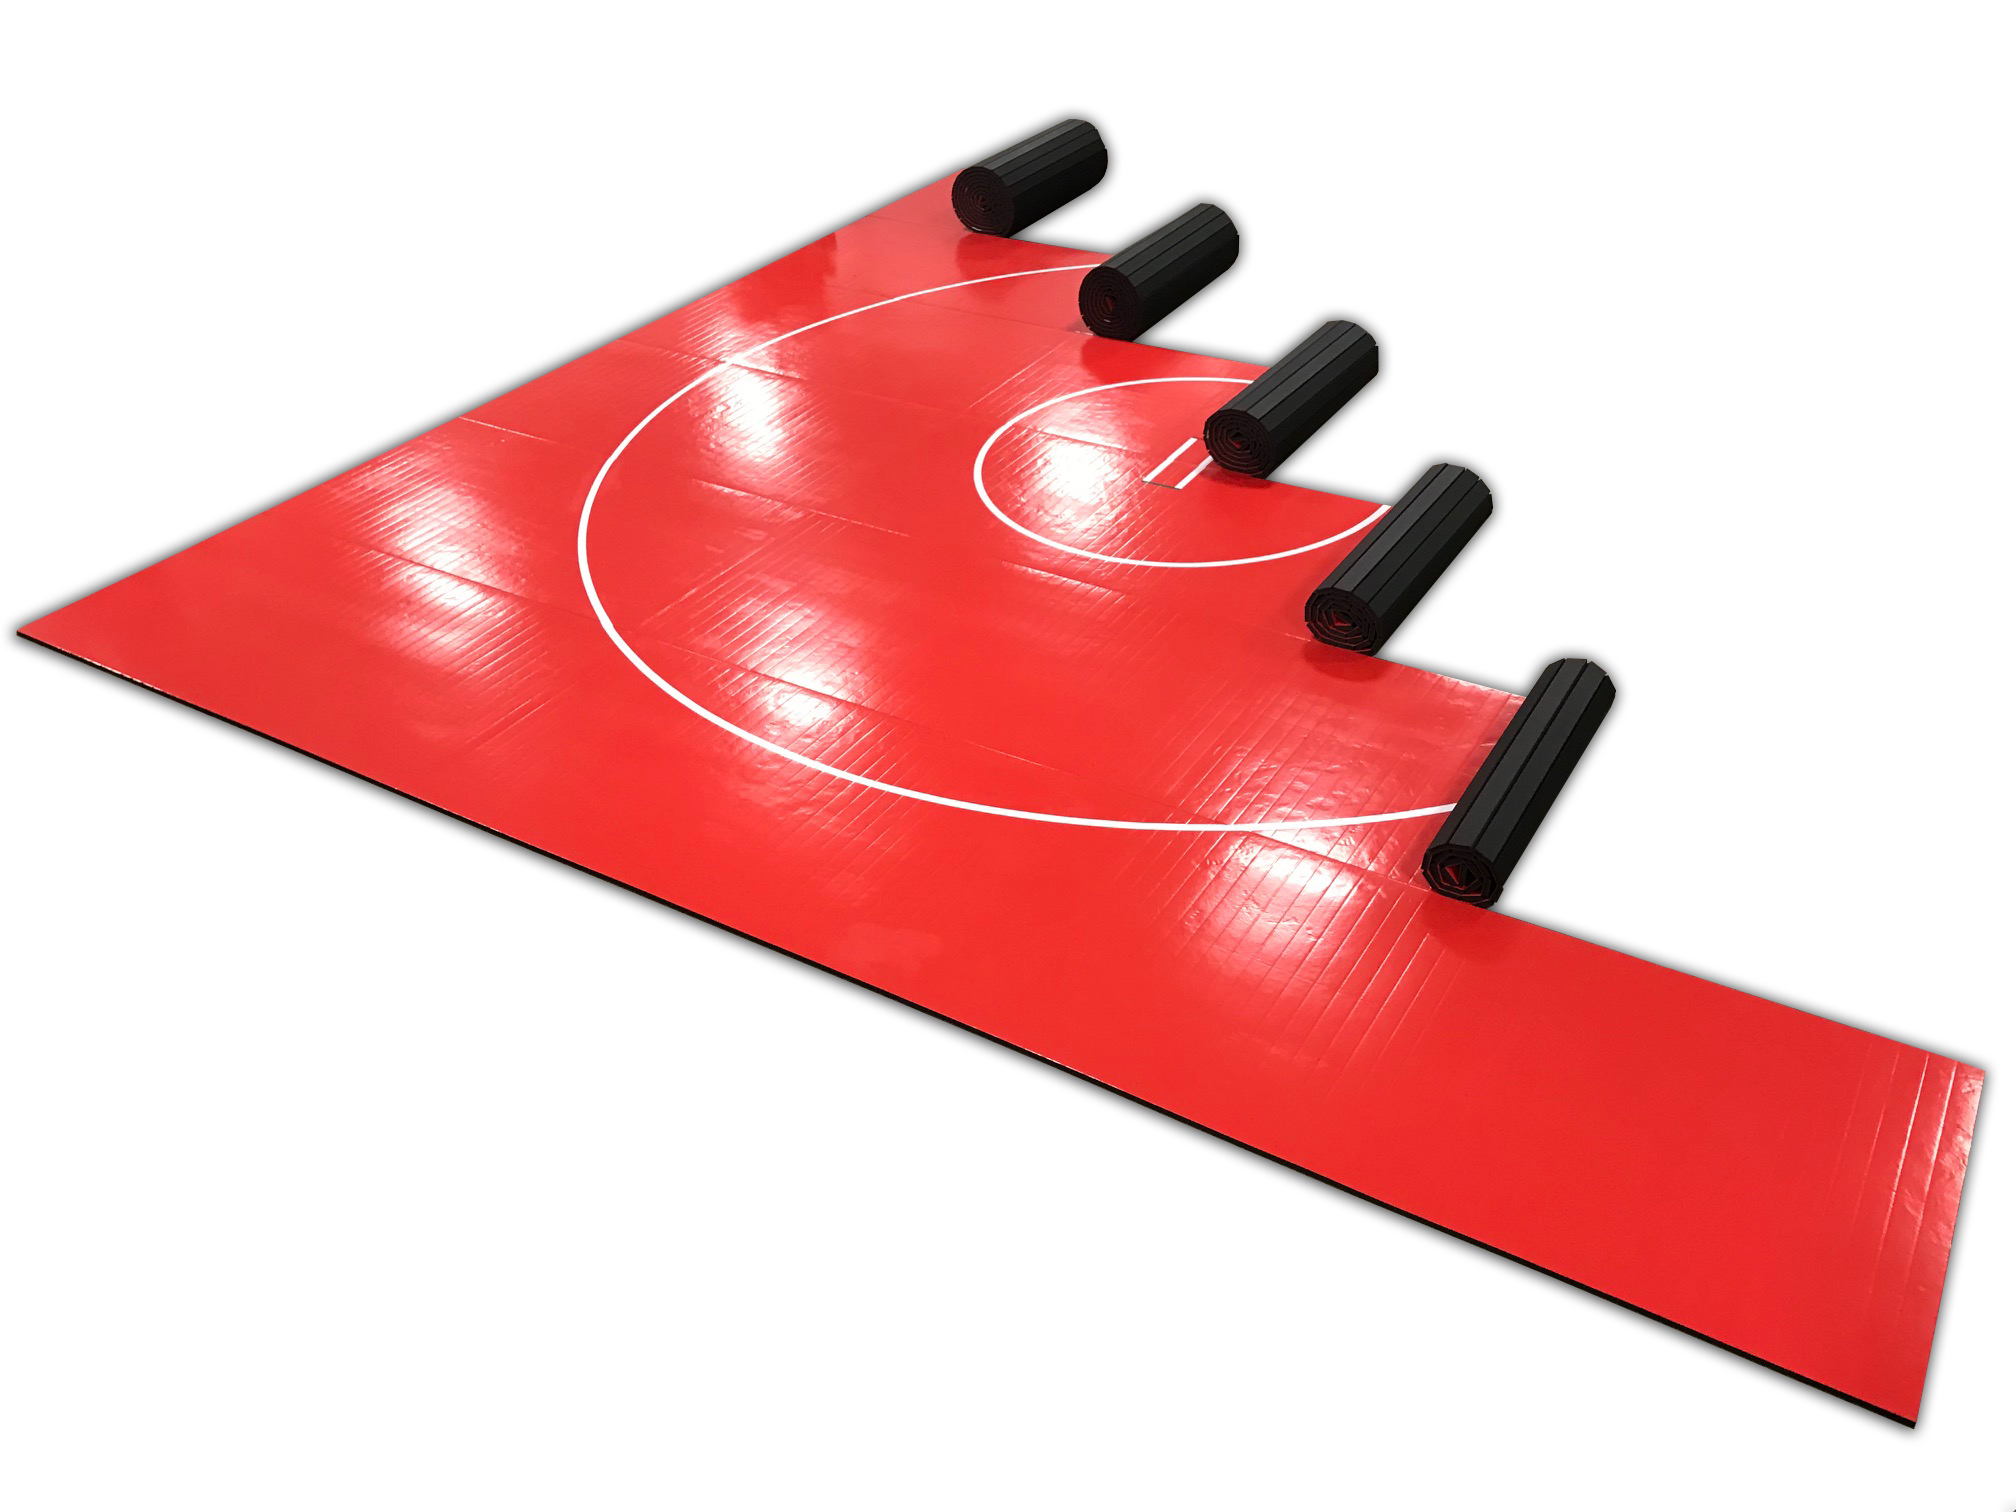 AK Athletics RollUp Red Wrestling Mat. Wholesale priced wrestling mat for sale. Black mat with white circles. AK Athletic Equipment wrestling/mixed martial arts mat product. Made in America.